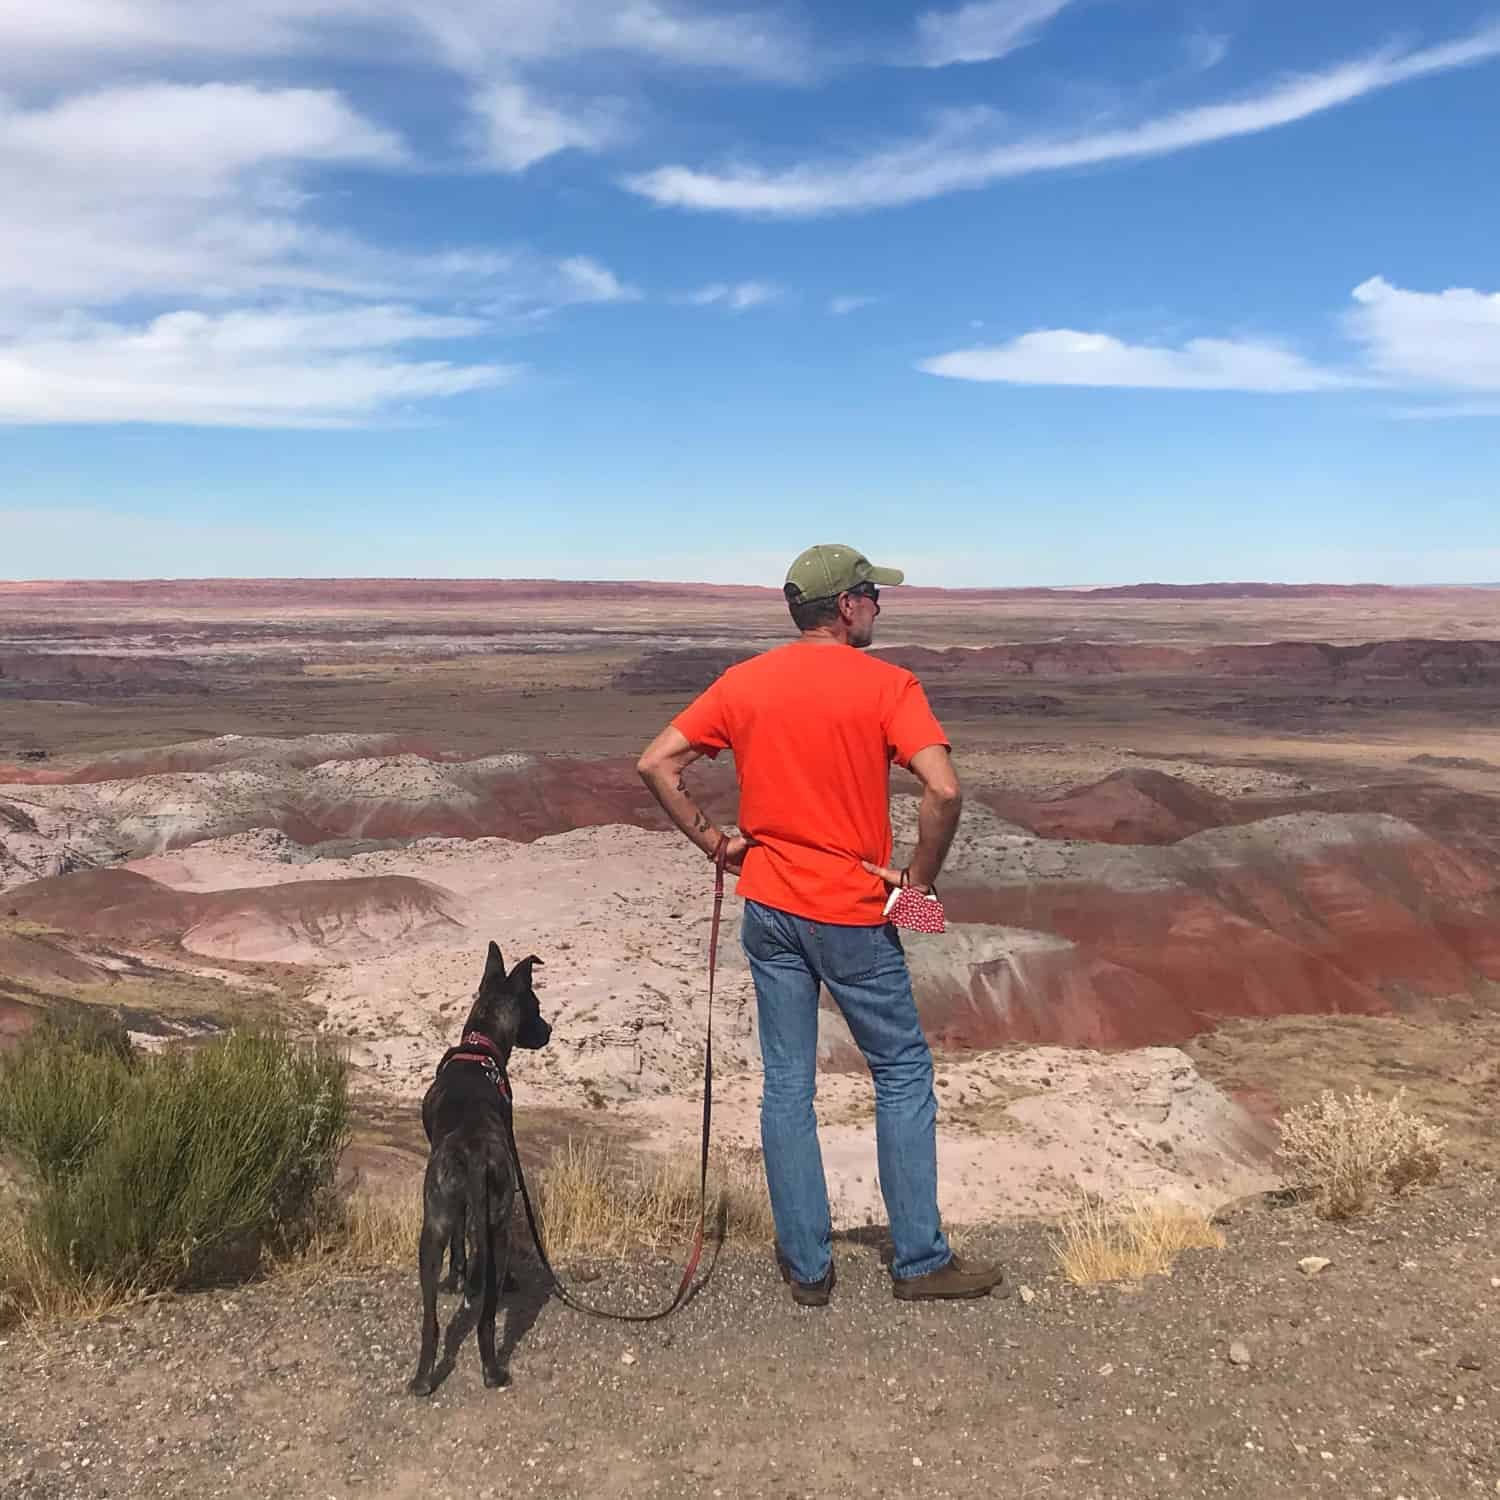 PetrifiedForest - National Park Free Admission Days In 2022